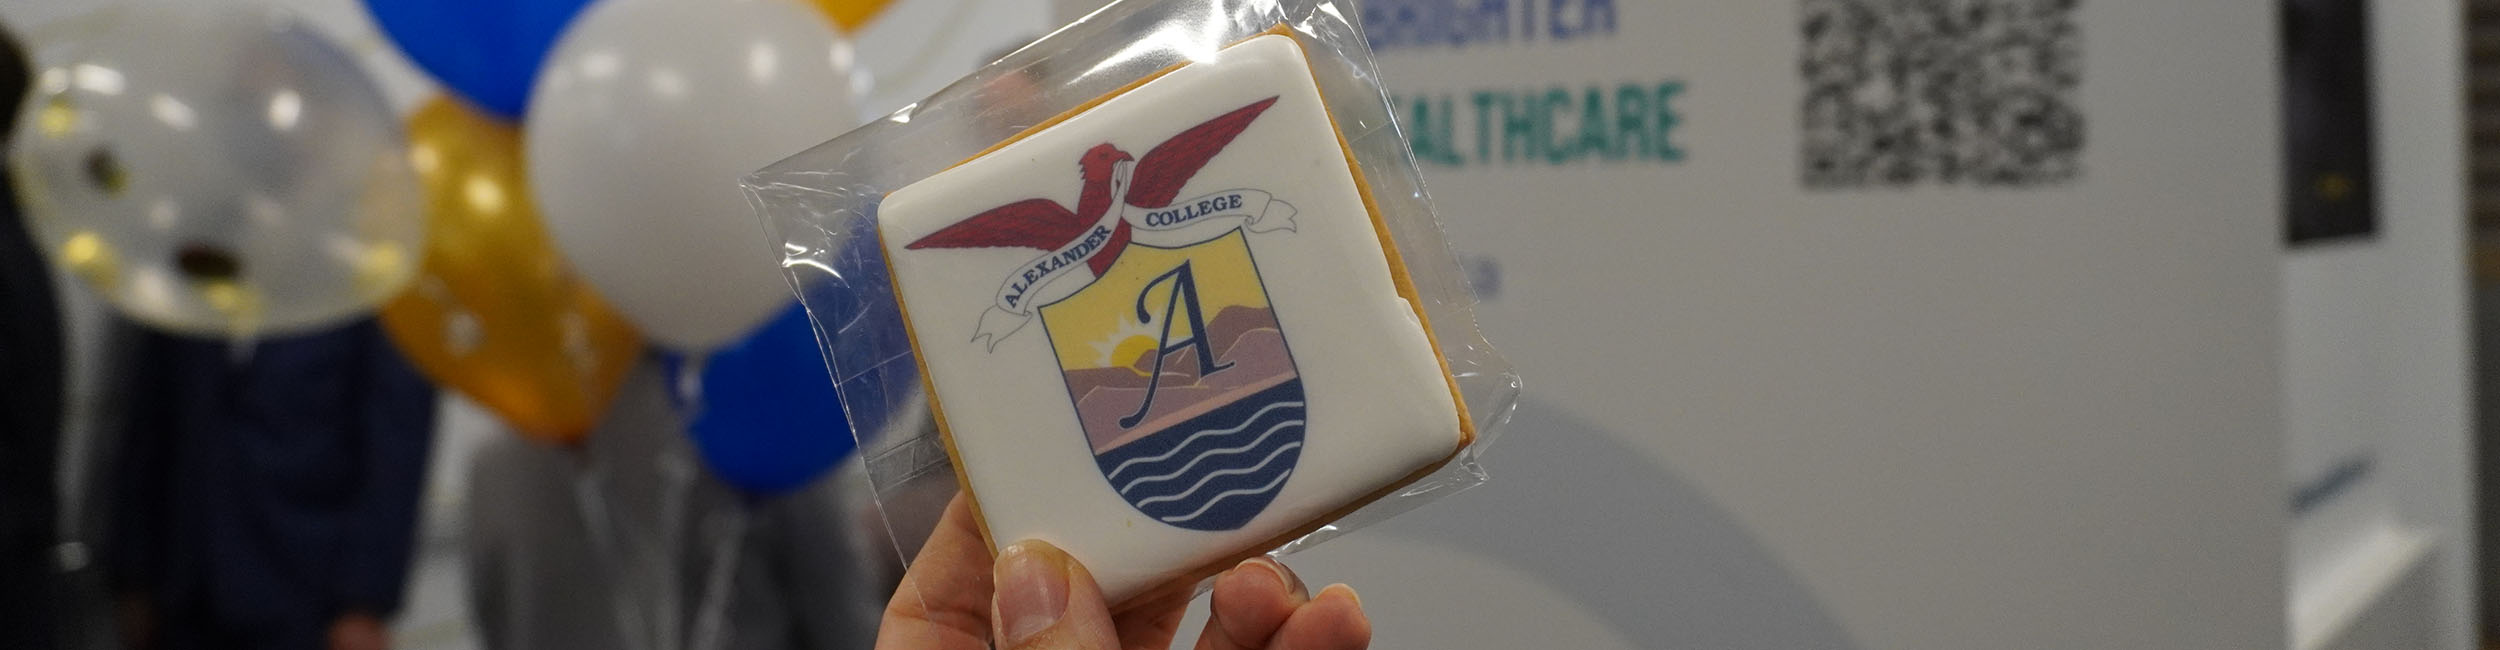 hand holding up an Alexander College cookie